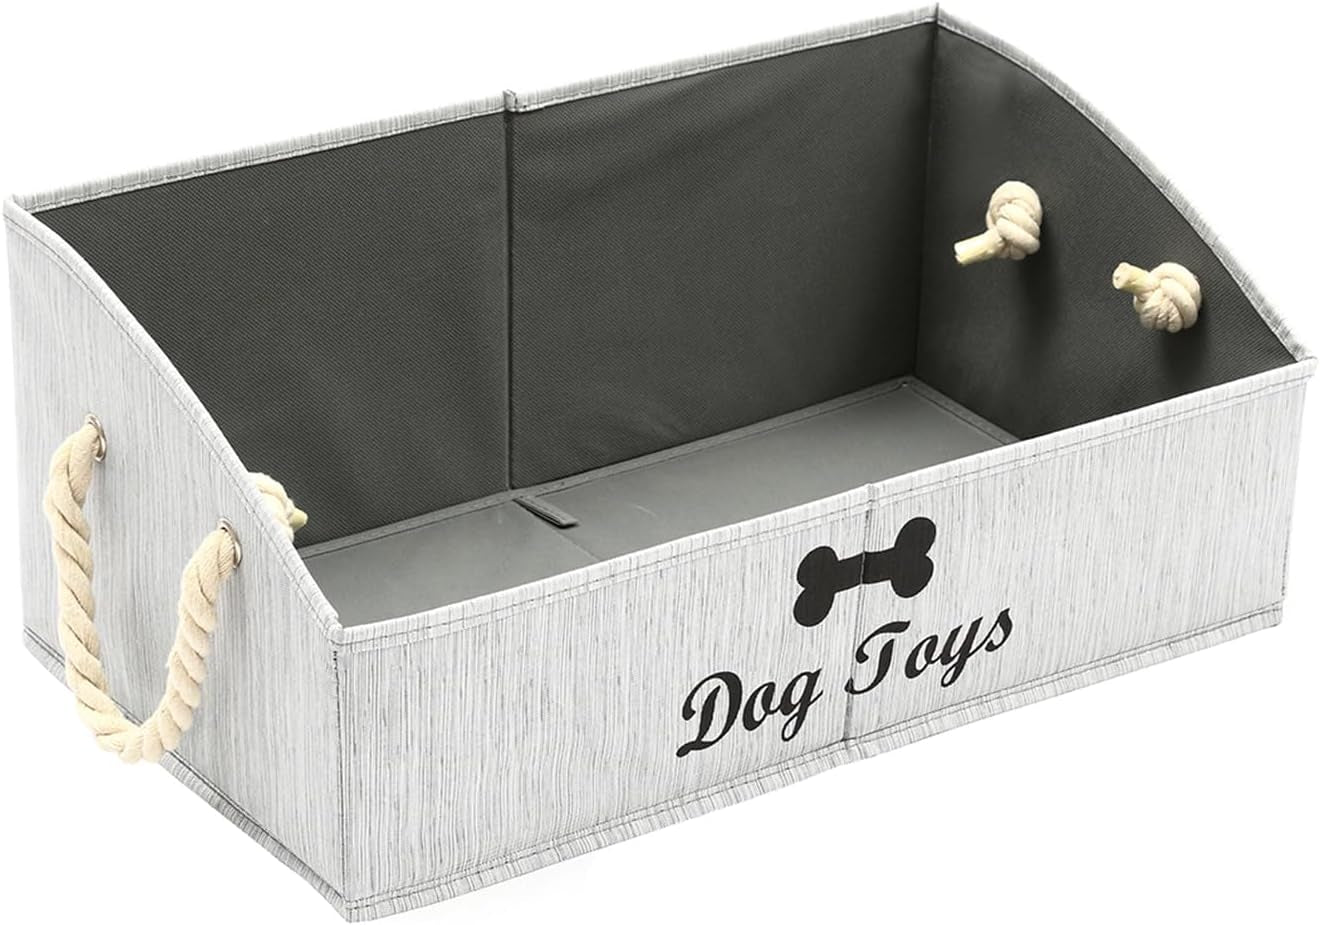 Large Dog Toy Bin Puppy Shallow Toy Baskets - Perfect for Collapsible Bin for Living Room, Playroom, Closet, Home Organization - Grey - Rectangle - Dog